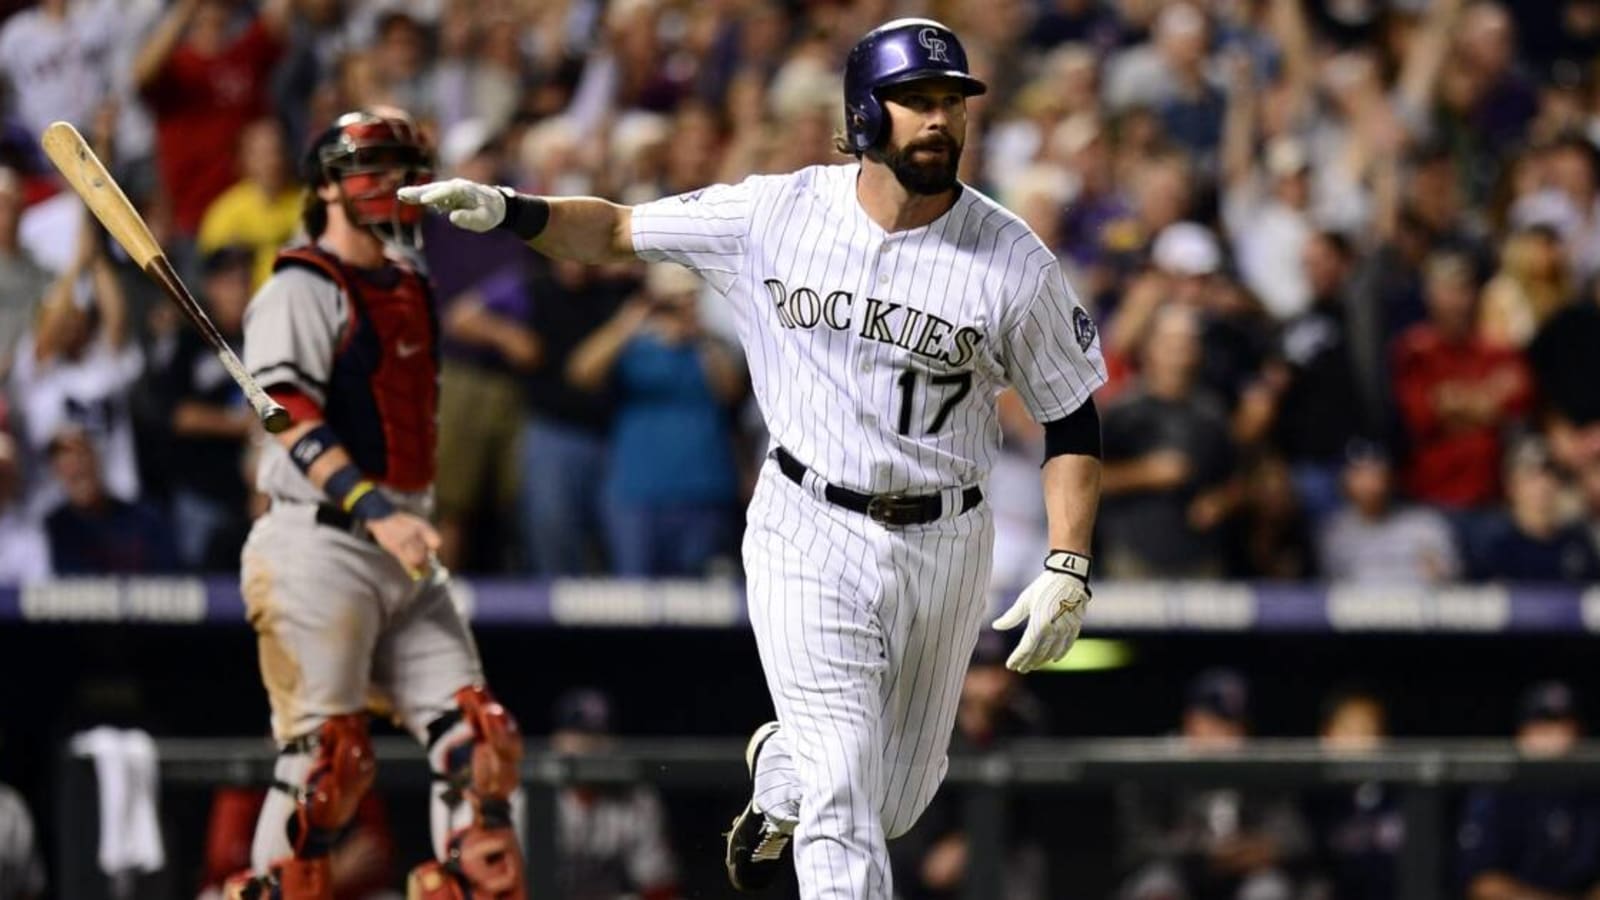 Colorado Rockies legend Todd Helton elected into National Baseball Hall of Fame